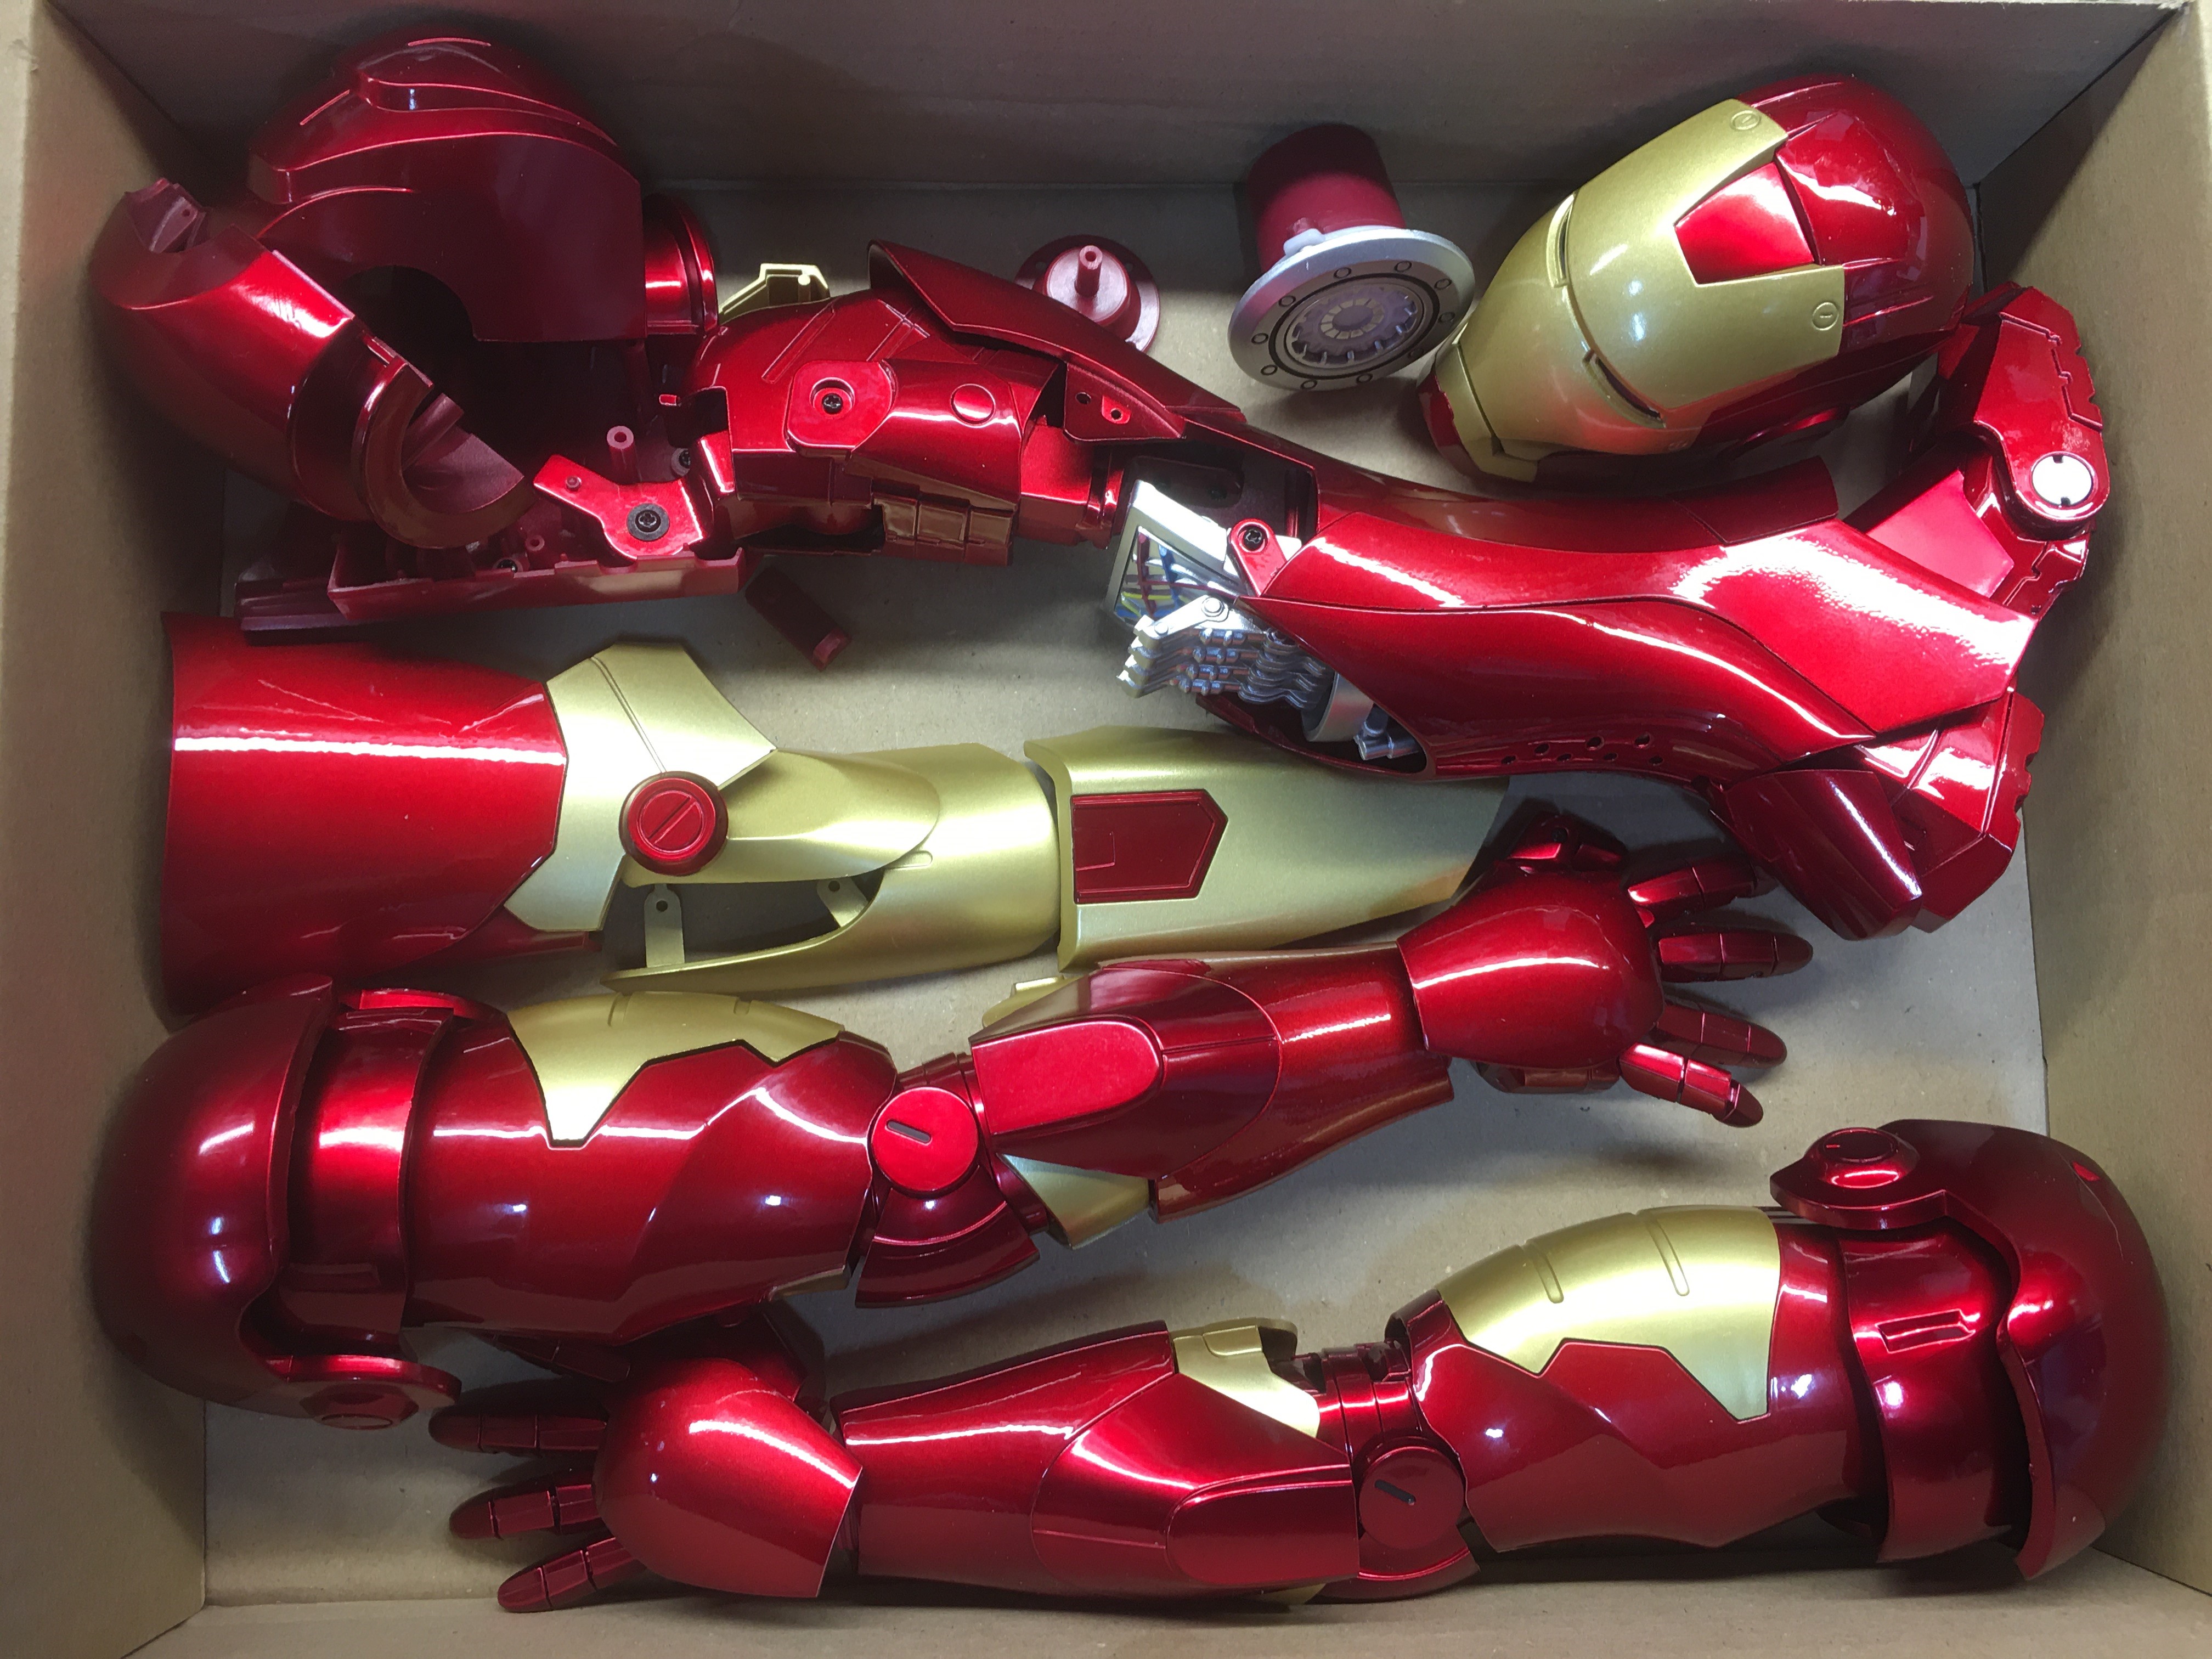 Iron Man build up model from Marvel - Fanhome